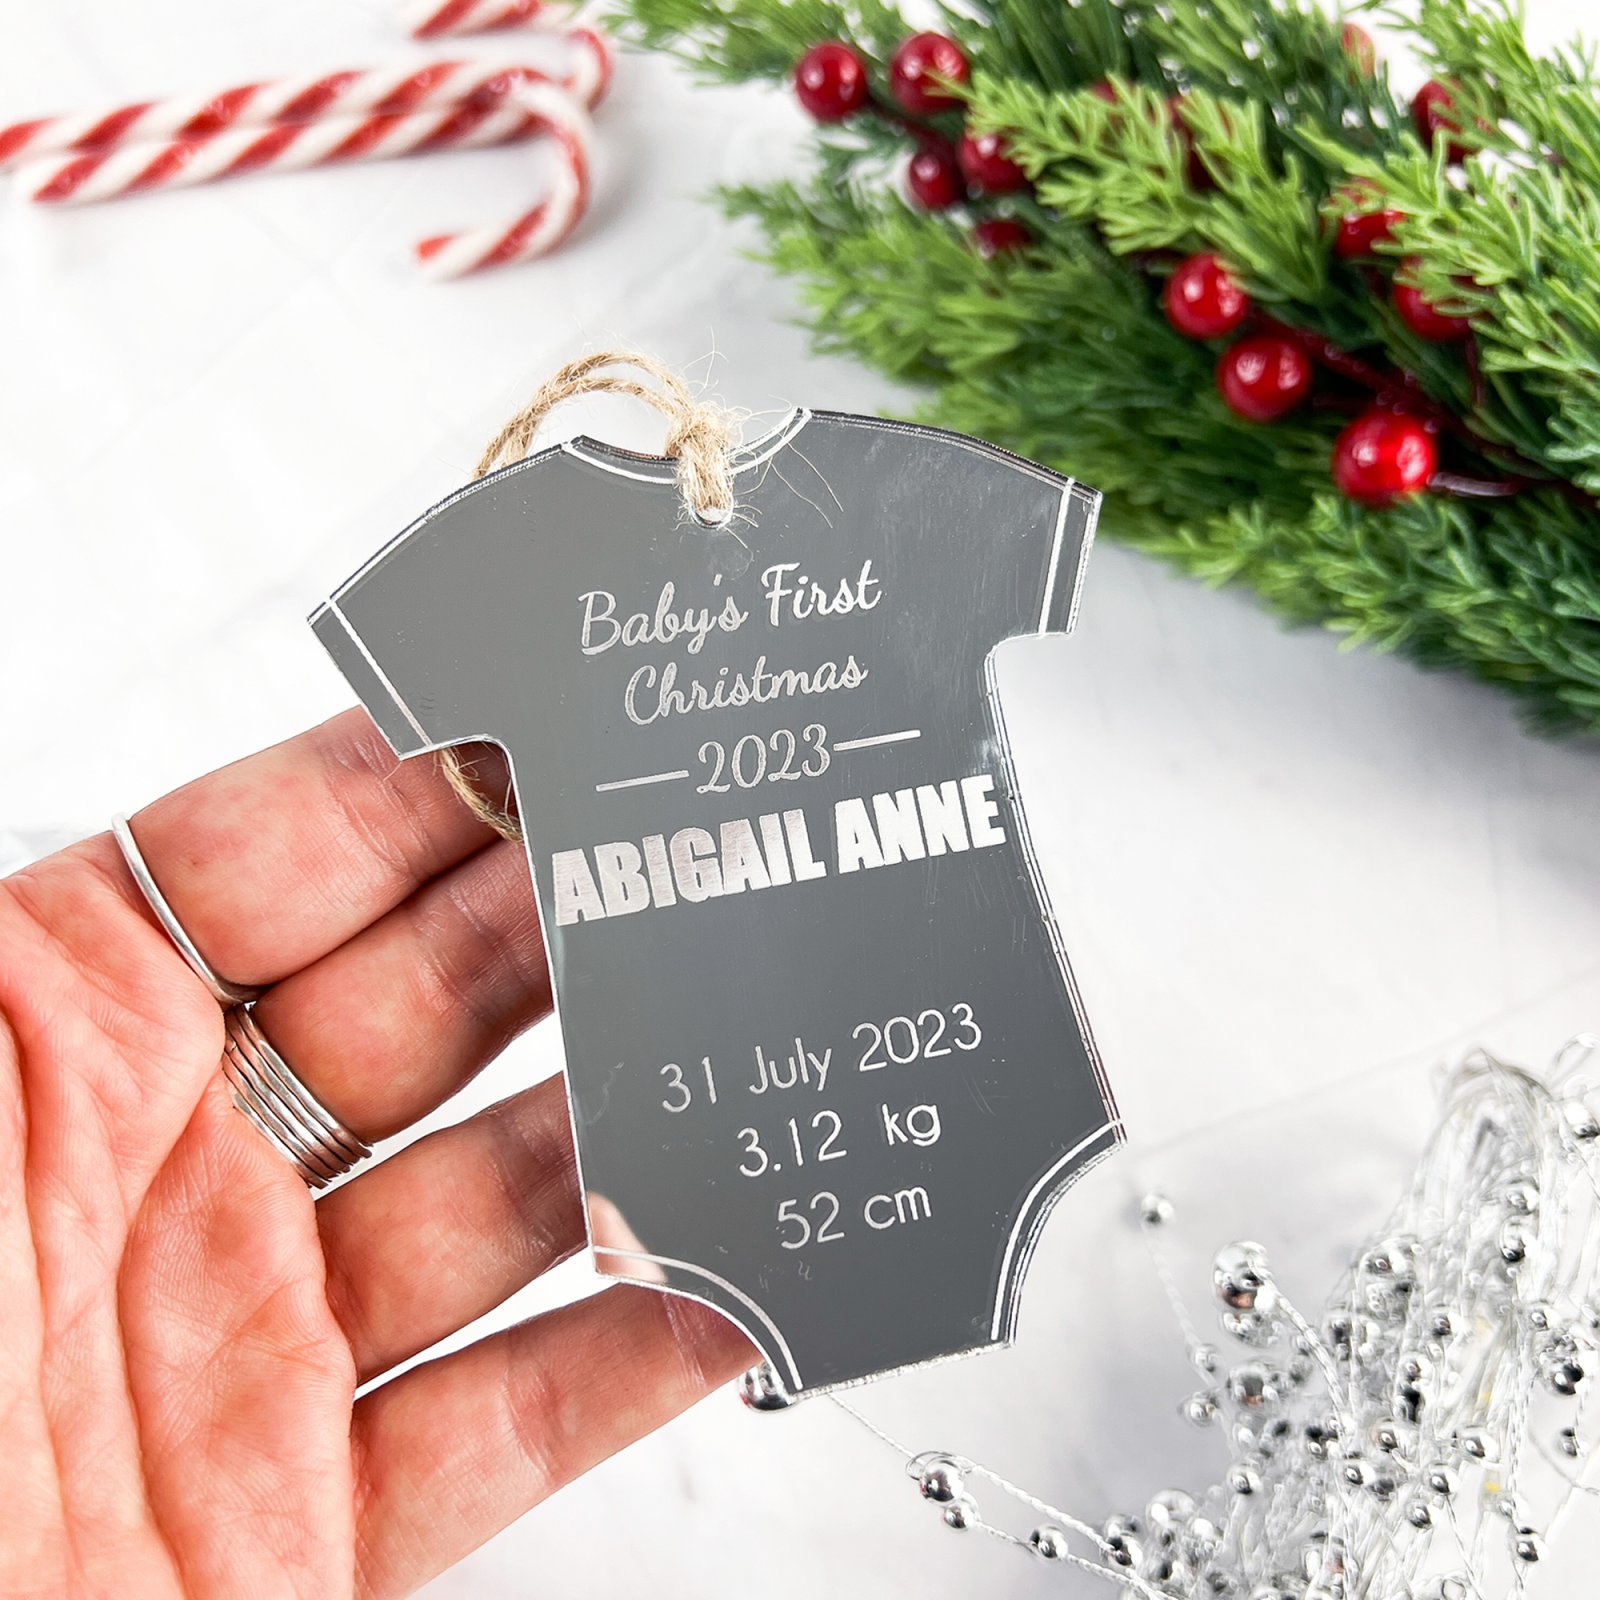 Baby's first christmas bodysuit ornament